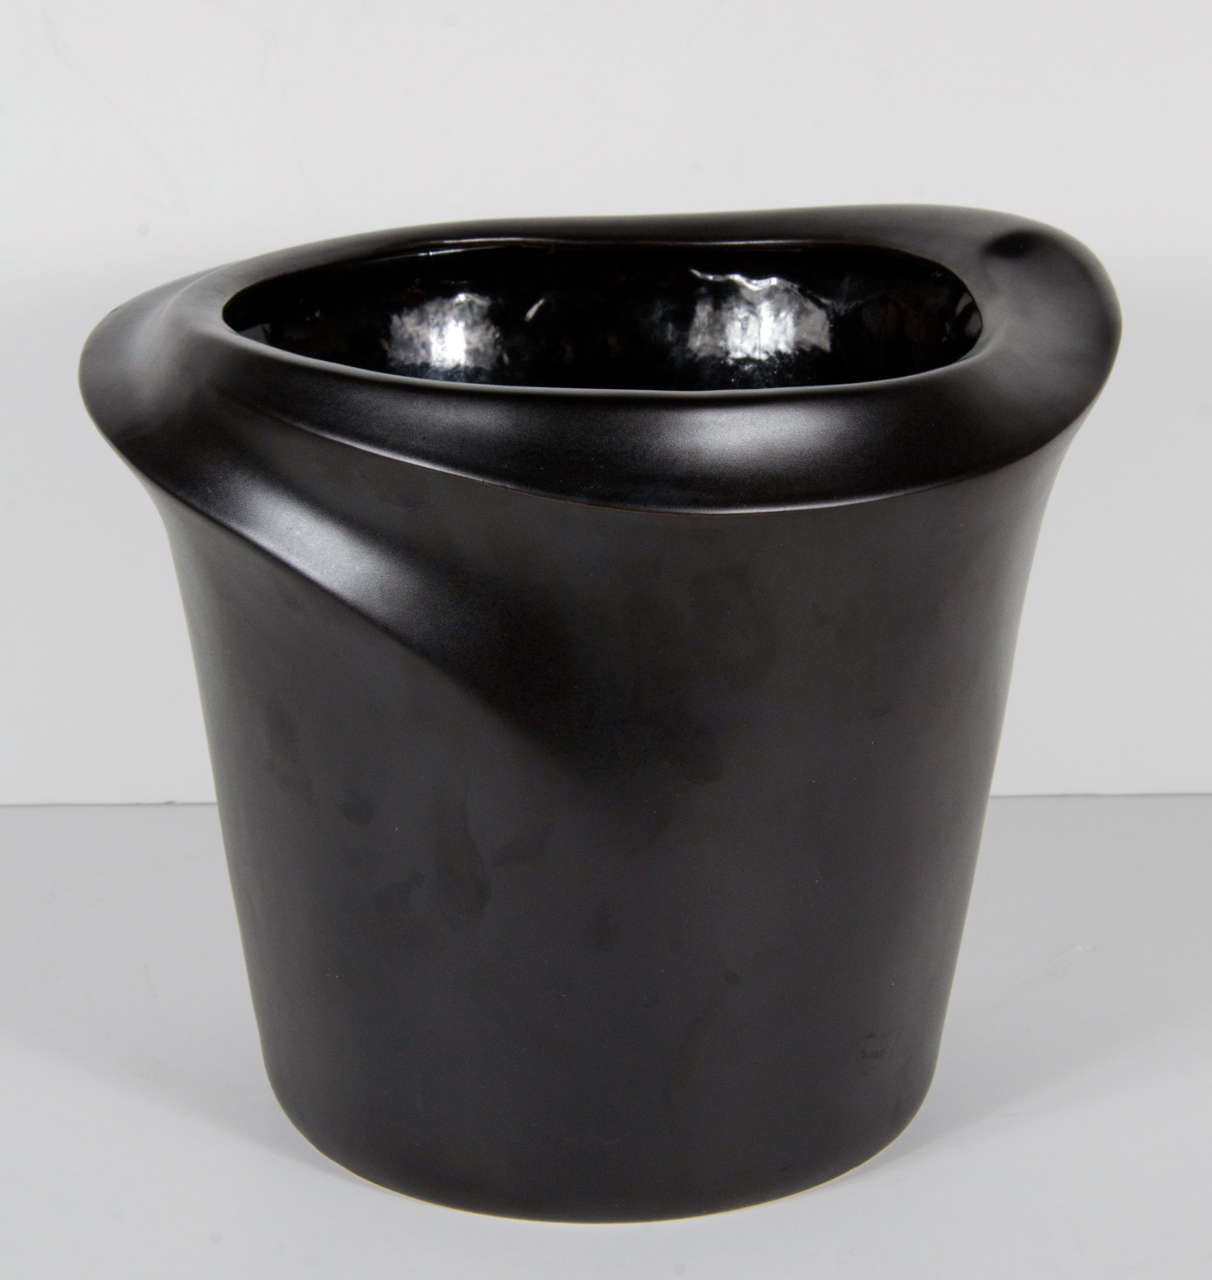 This ultra chic bucket/cooler is designed by the noted Elsa Peretti for Tiffany & Co . It has an organic and naturalistic design and is made of matte finished black ceramic.It bears the signature of Elsa Peretti for Tiffany and Co.This would also